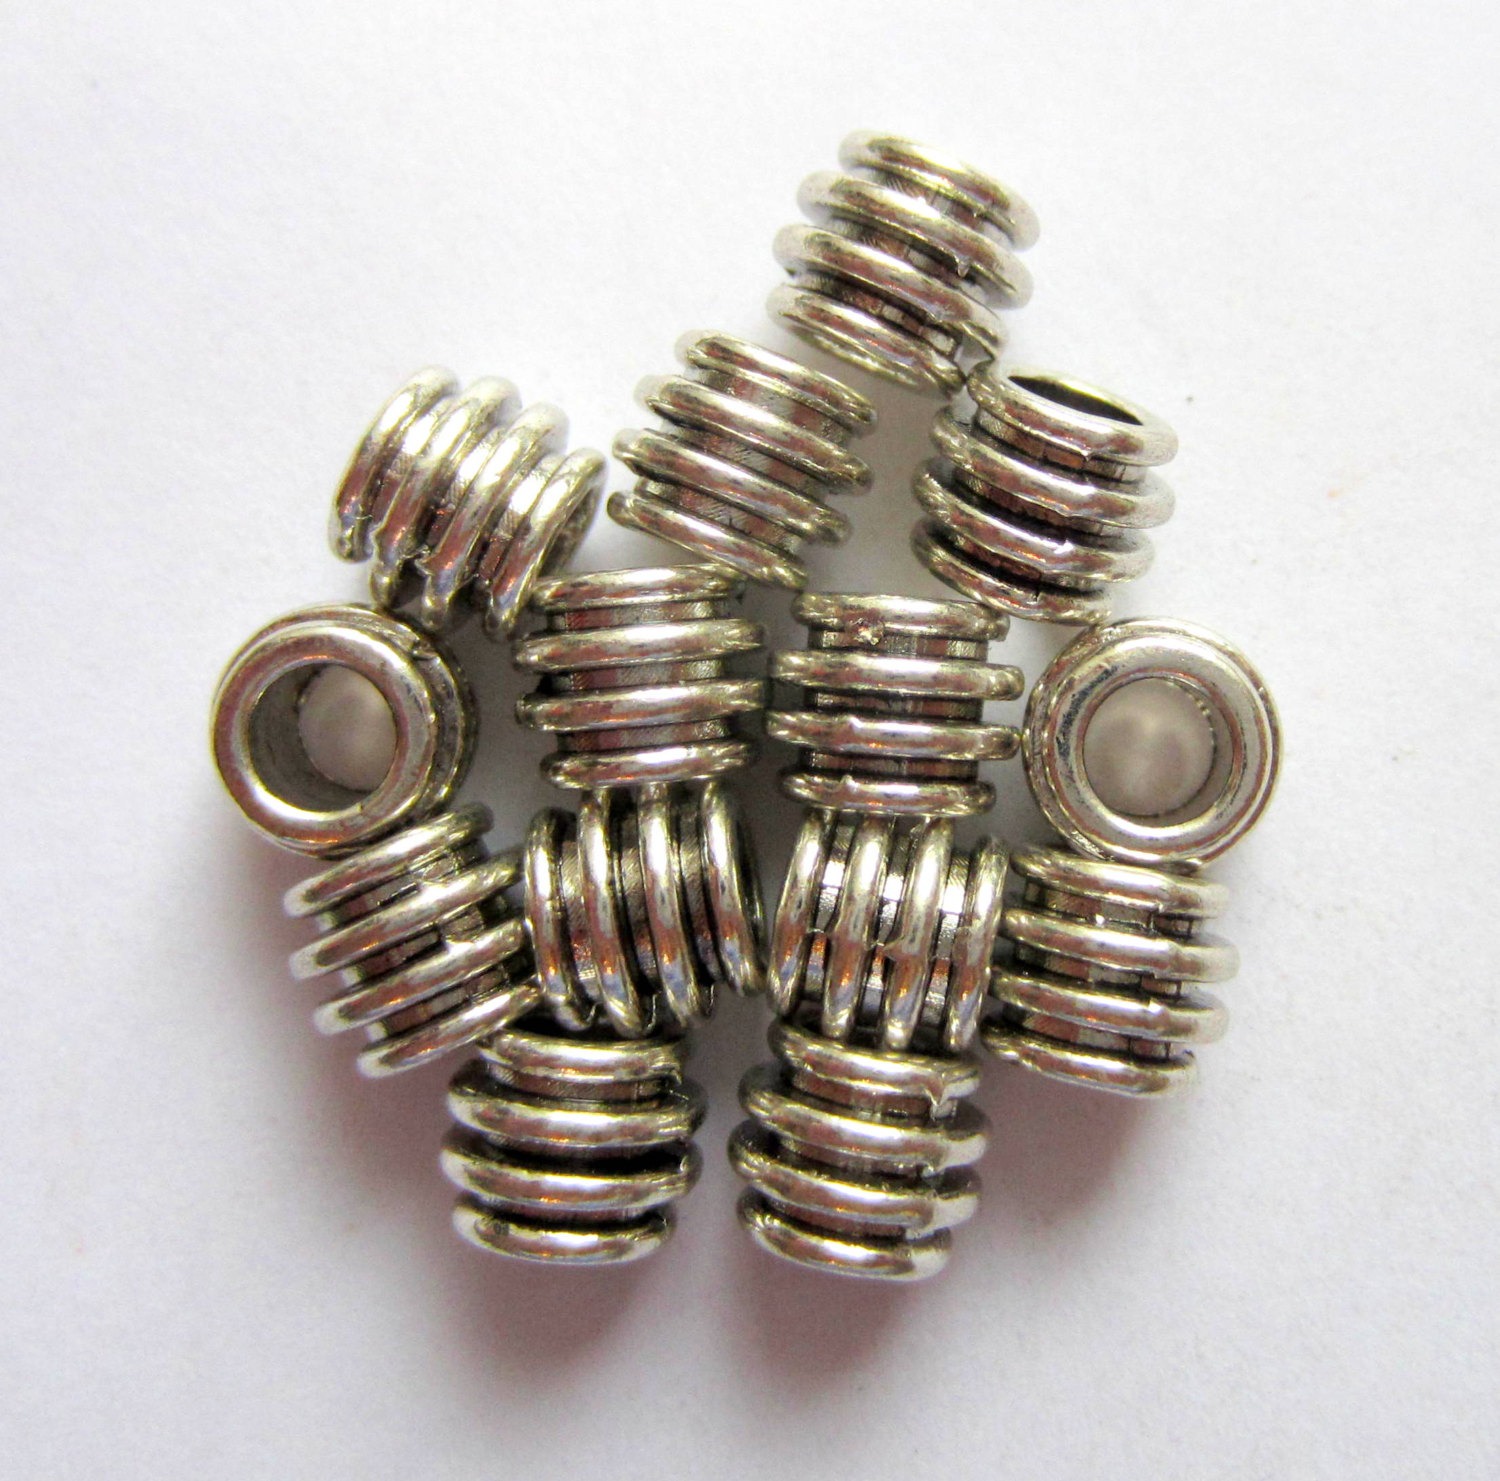 24 Antique silver metal beads textured spacers 6mm x 8mm tibetan style rondelle beads large hole k0nz steampunk buy now online